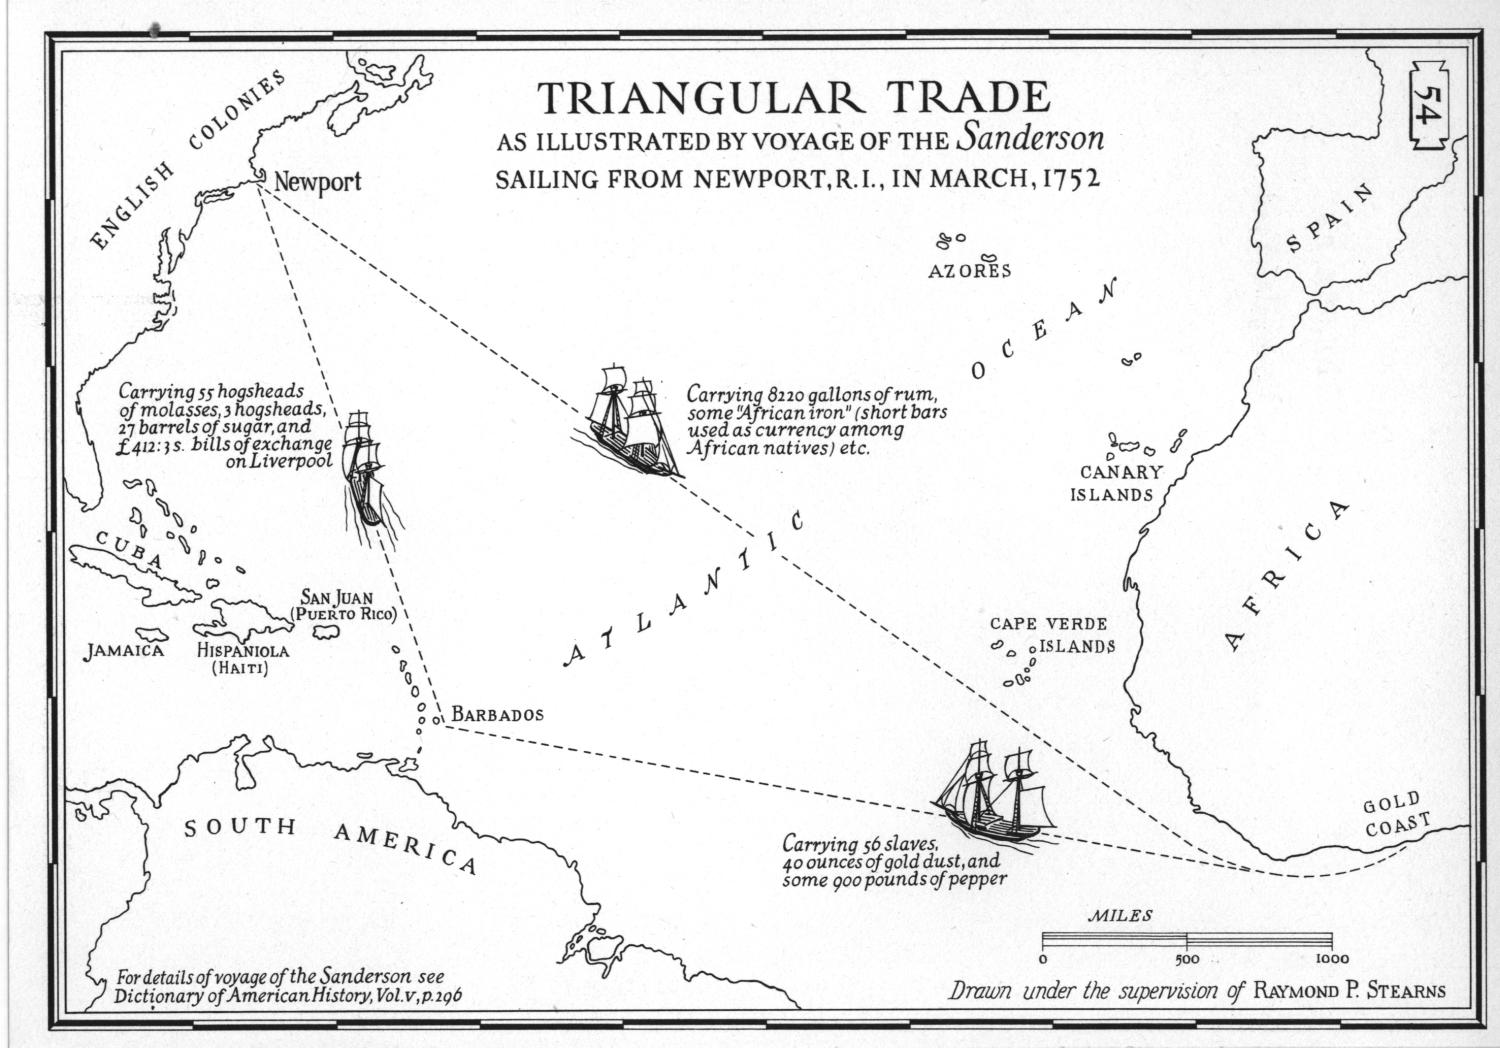 Triangular Trade Route Map Image